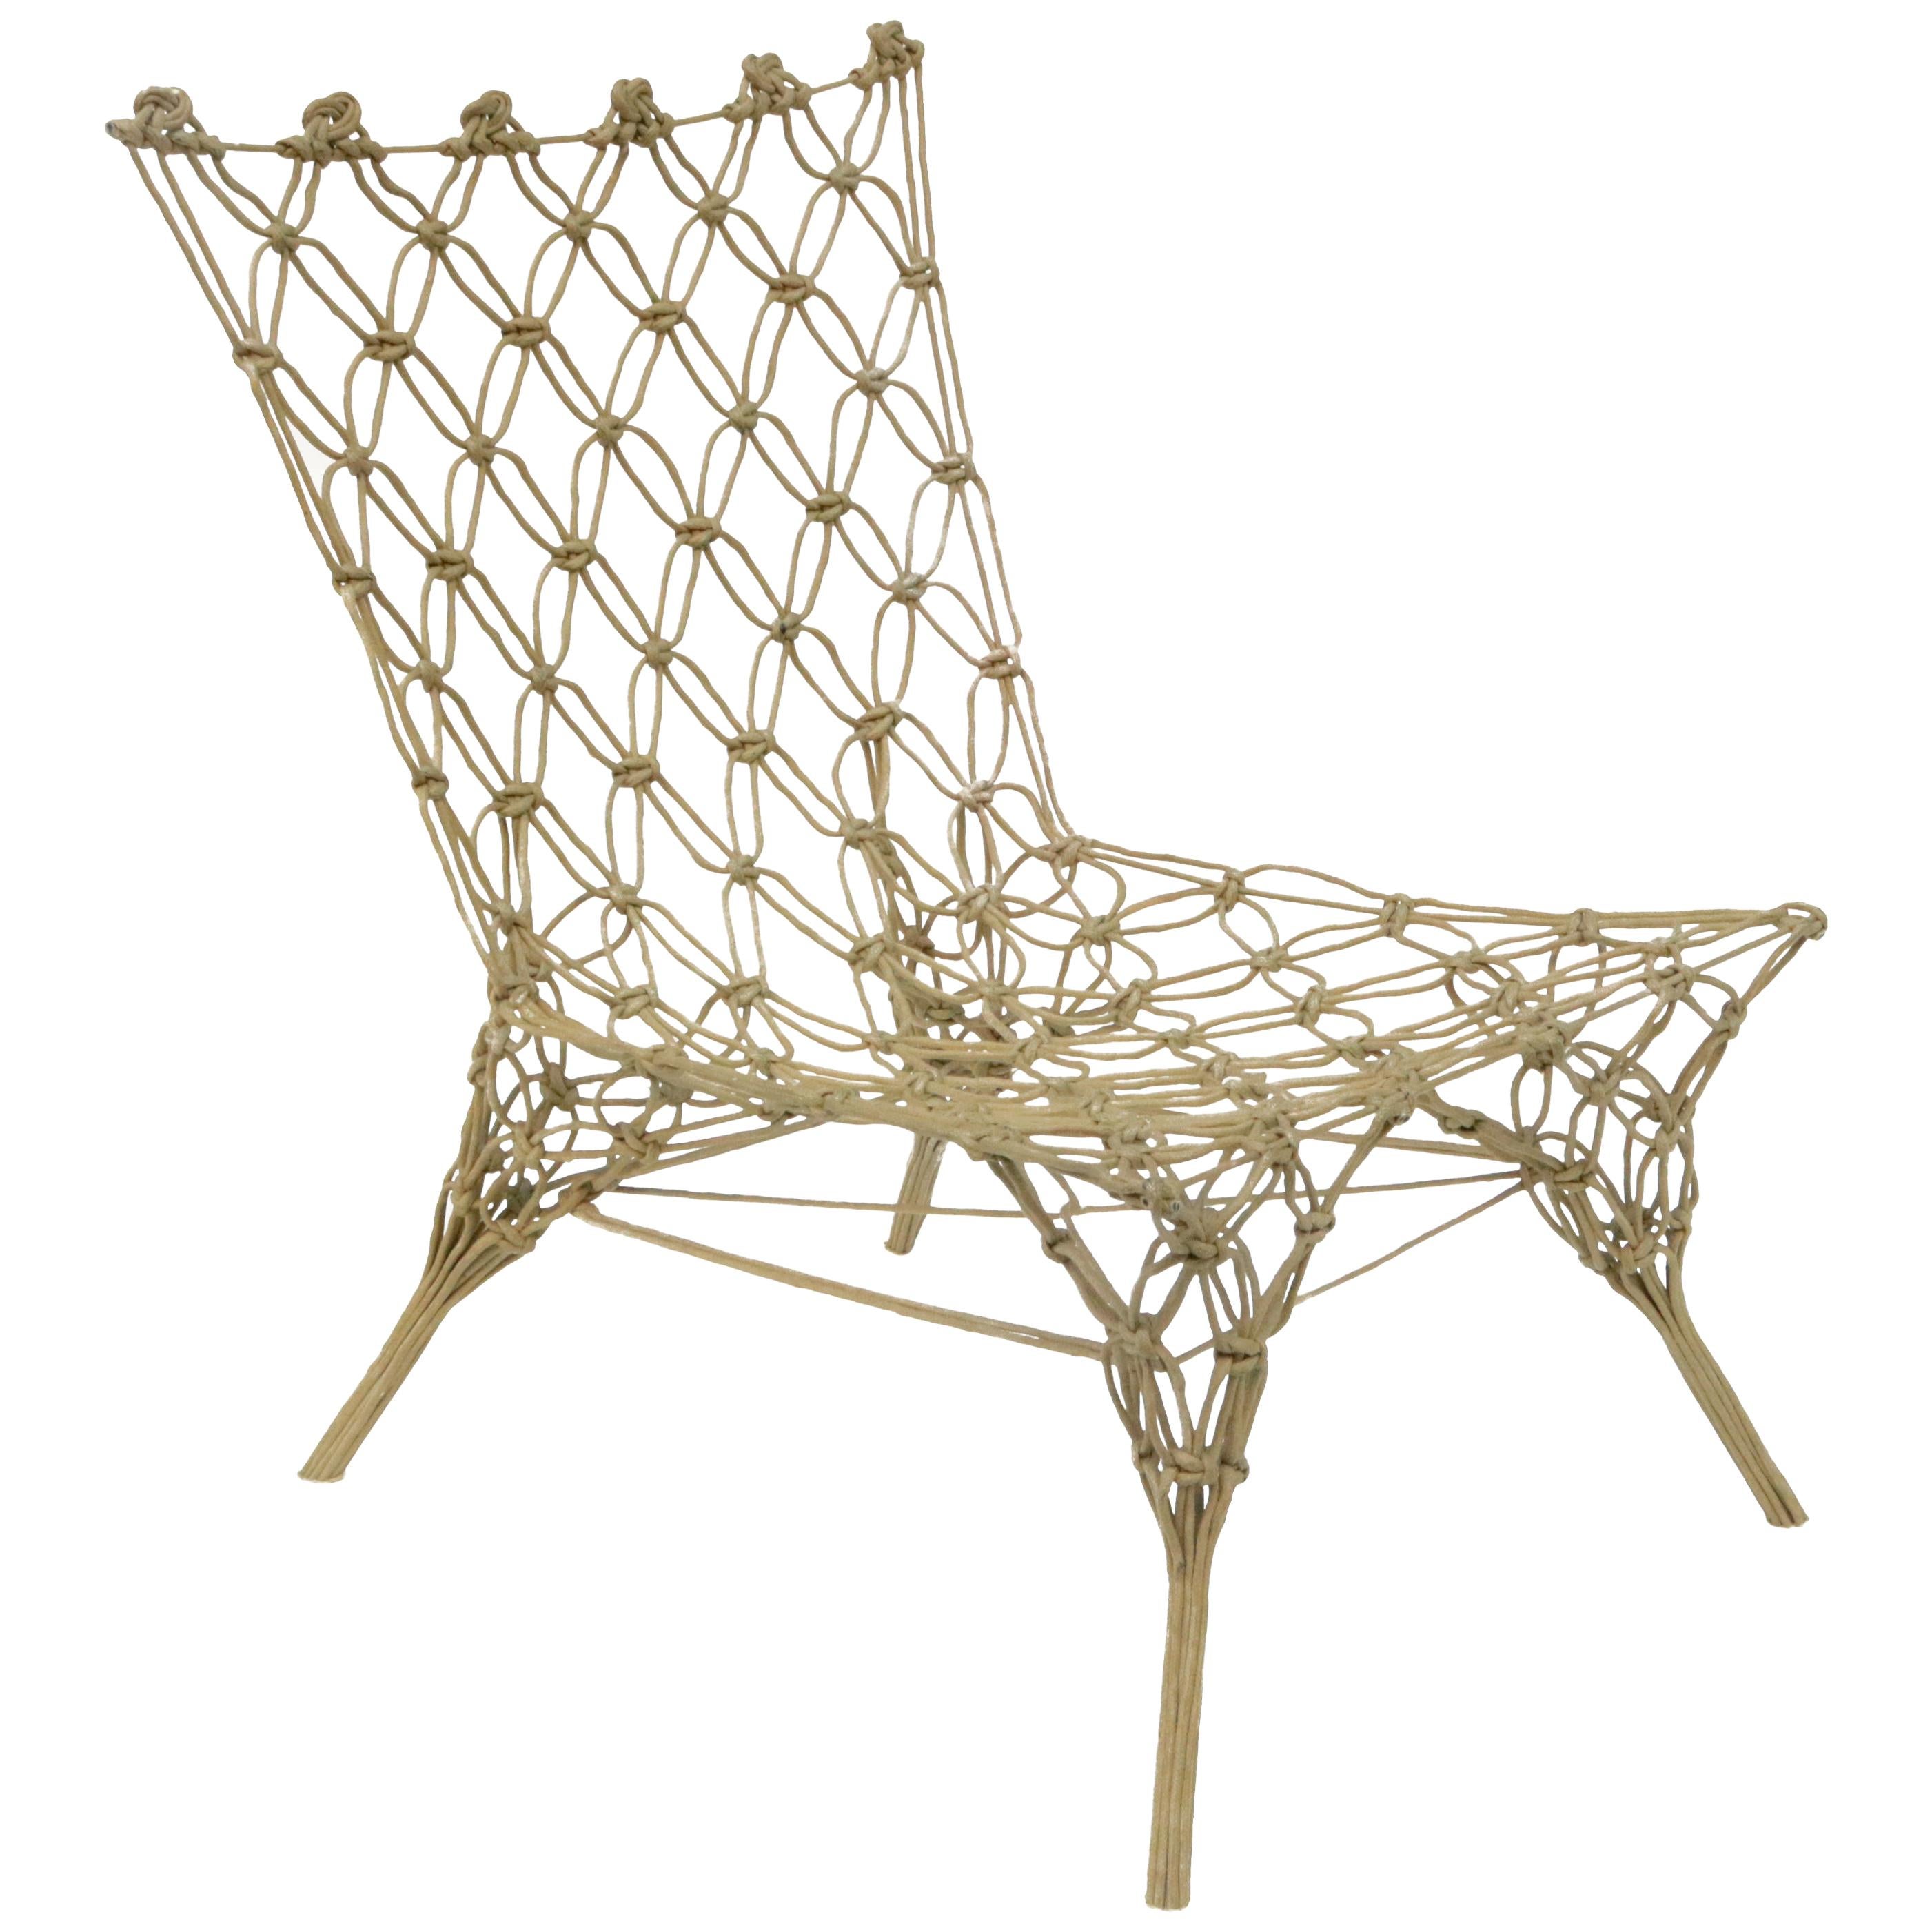 "Knotted Chair" by Marcel Wanders